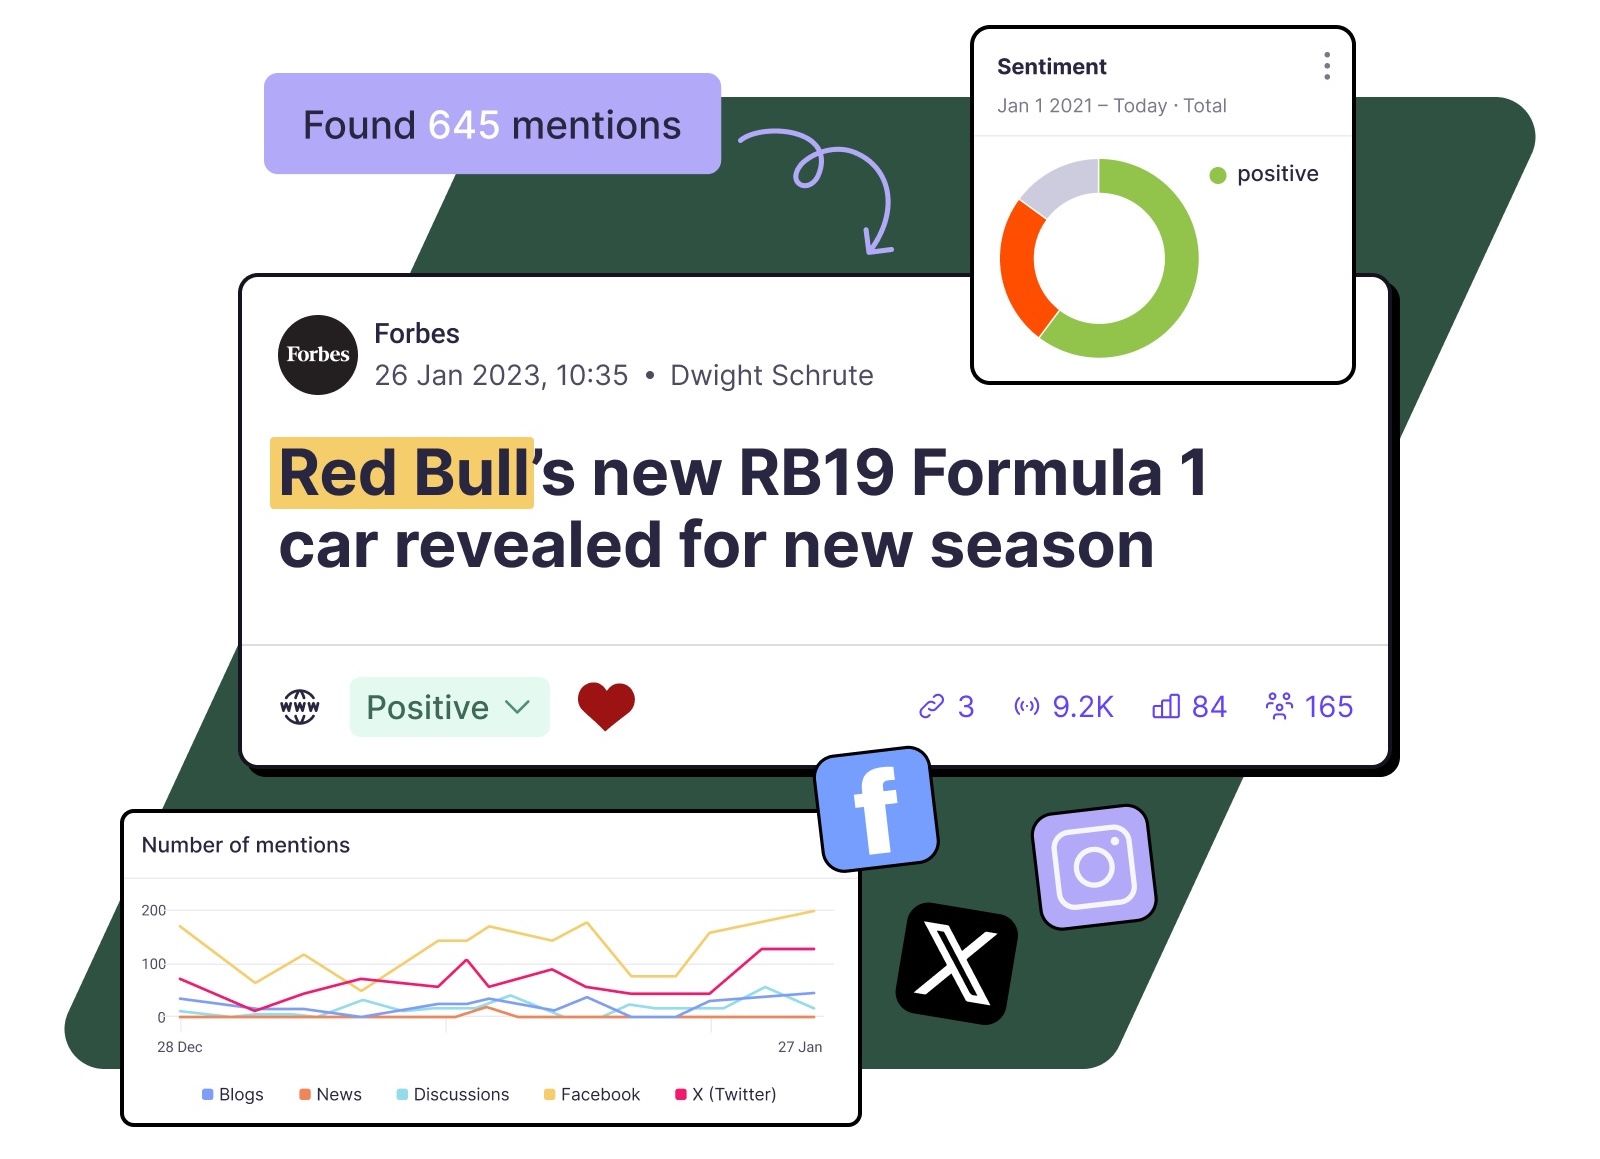 Track press hits and social mentions across the web with advanced filters and AI that makes sure you're focusing on just the PR mentions that matter.